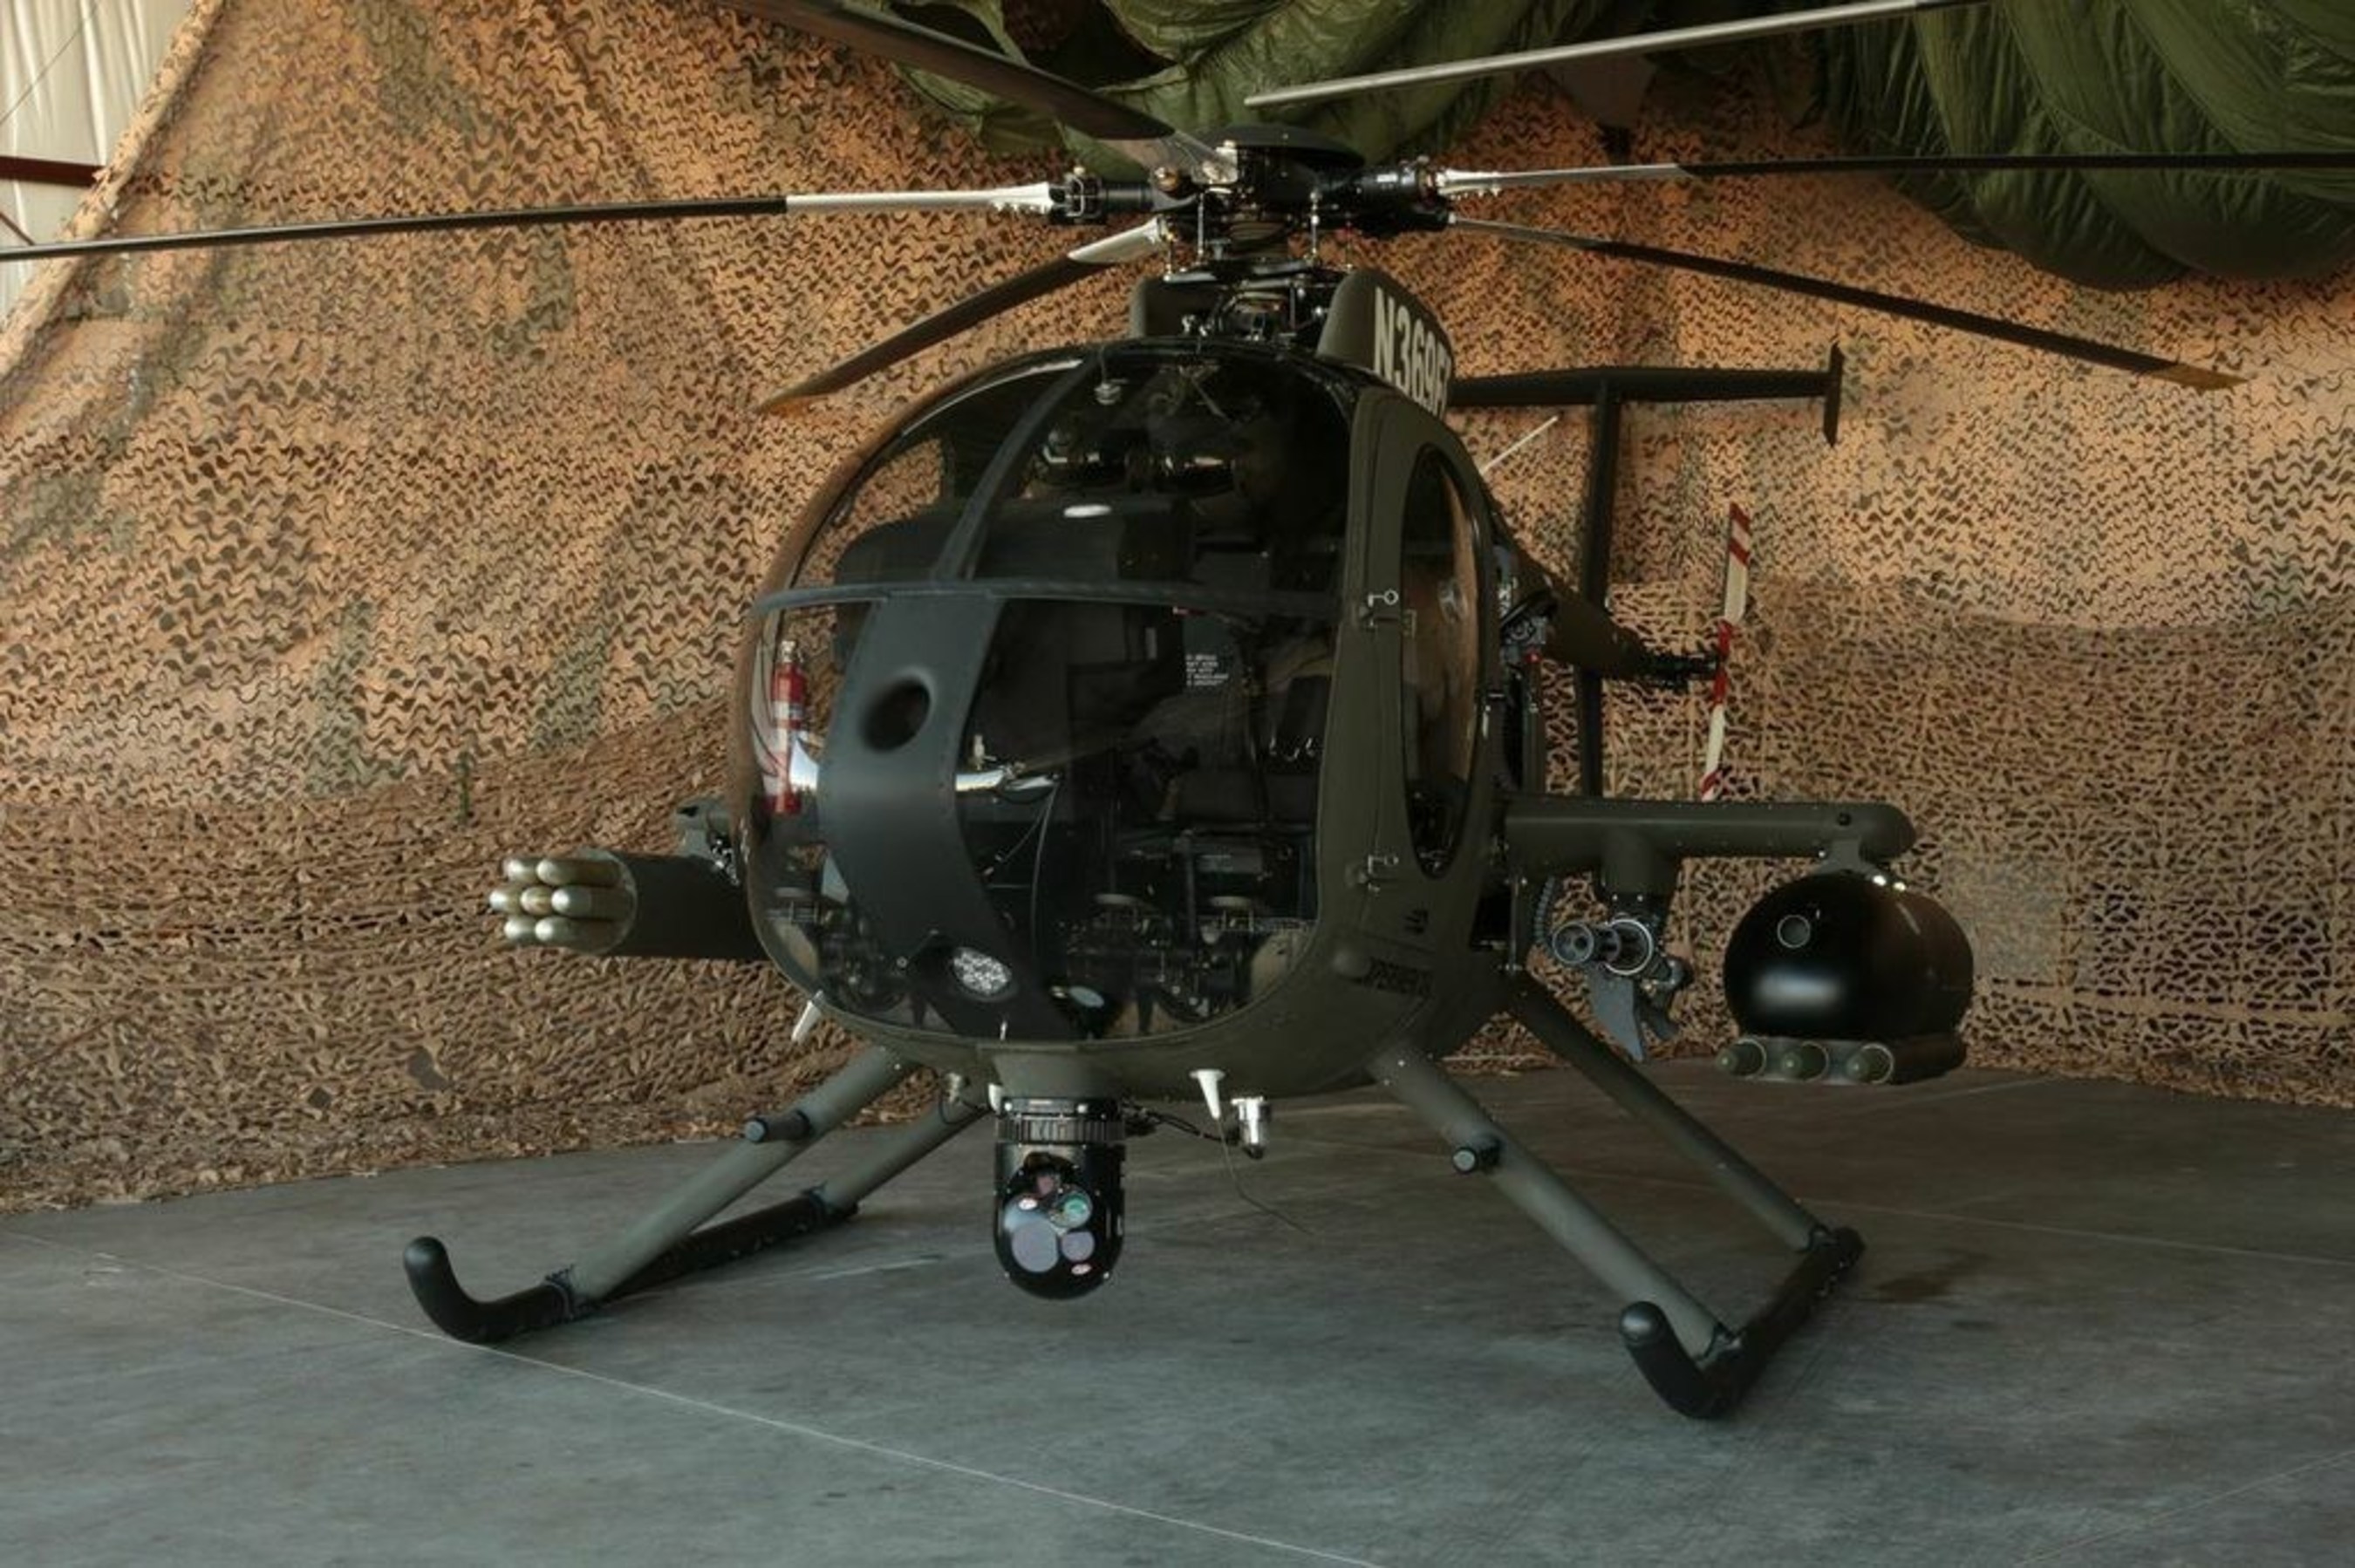 The MD 530G Scout Attack helicopter is a fully integrated gunship with a highly capable, customizable mission equipment package including the Moog Stores Management System (SMS), the Mace Aviation Extended Range Weapons Wing, FN Herstal Machine Gun Pods and Rocket Machine Pods, Dillon Aero M134D-H Mini-Gun, the L-3 Wescam MX-10D, and M260 rocket pod.

 (PRNewsFoto/MD Helicopters Inc.)